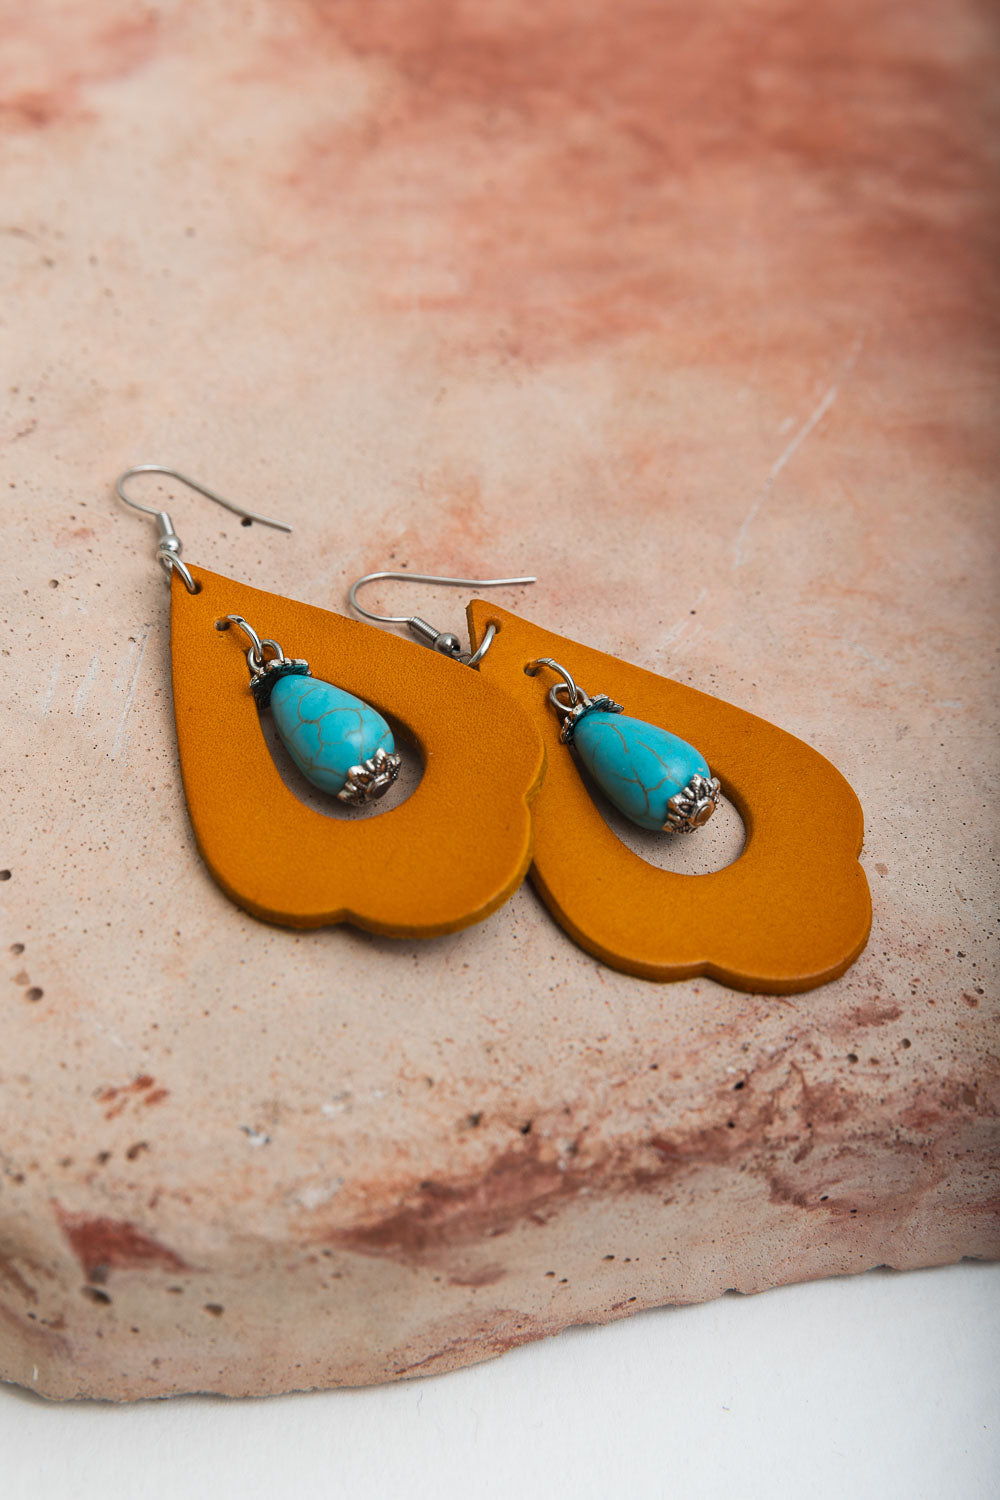 Western Leather Cutout Earrings w/ Turquoise Stone Jewelry